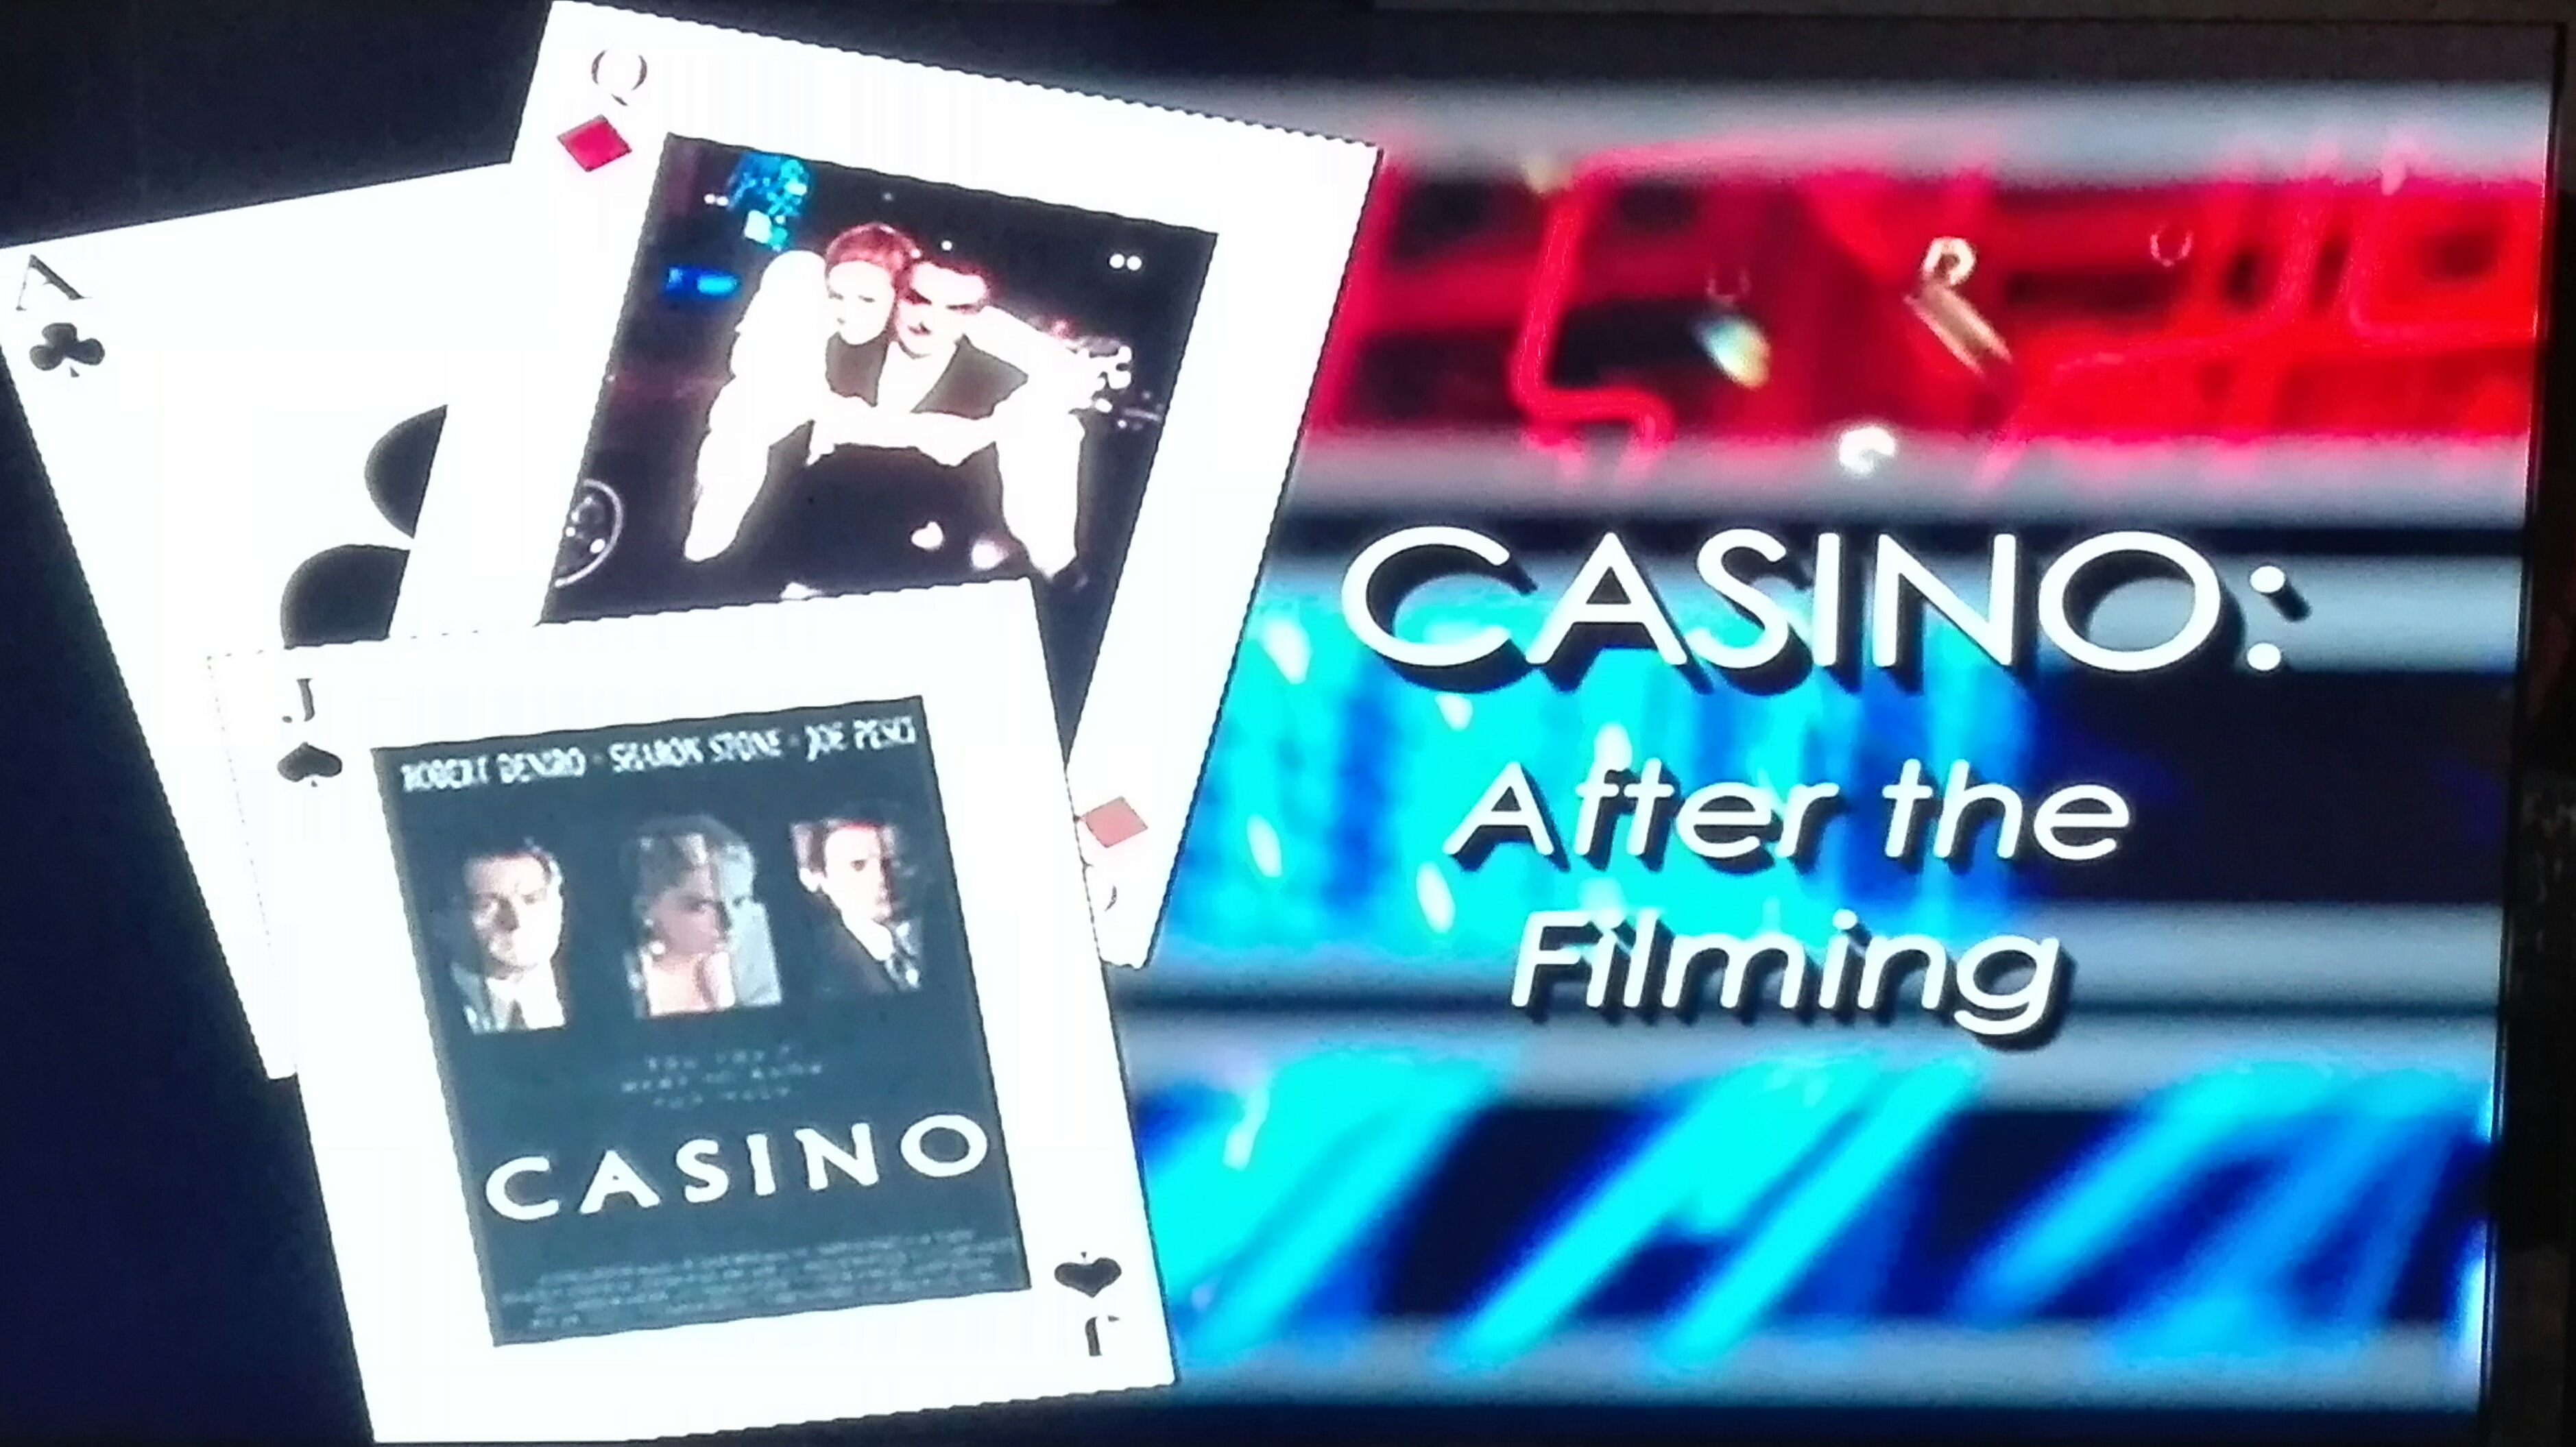 Casino: After the Filming